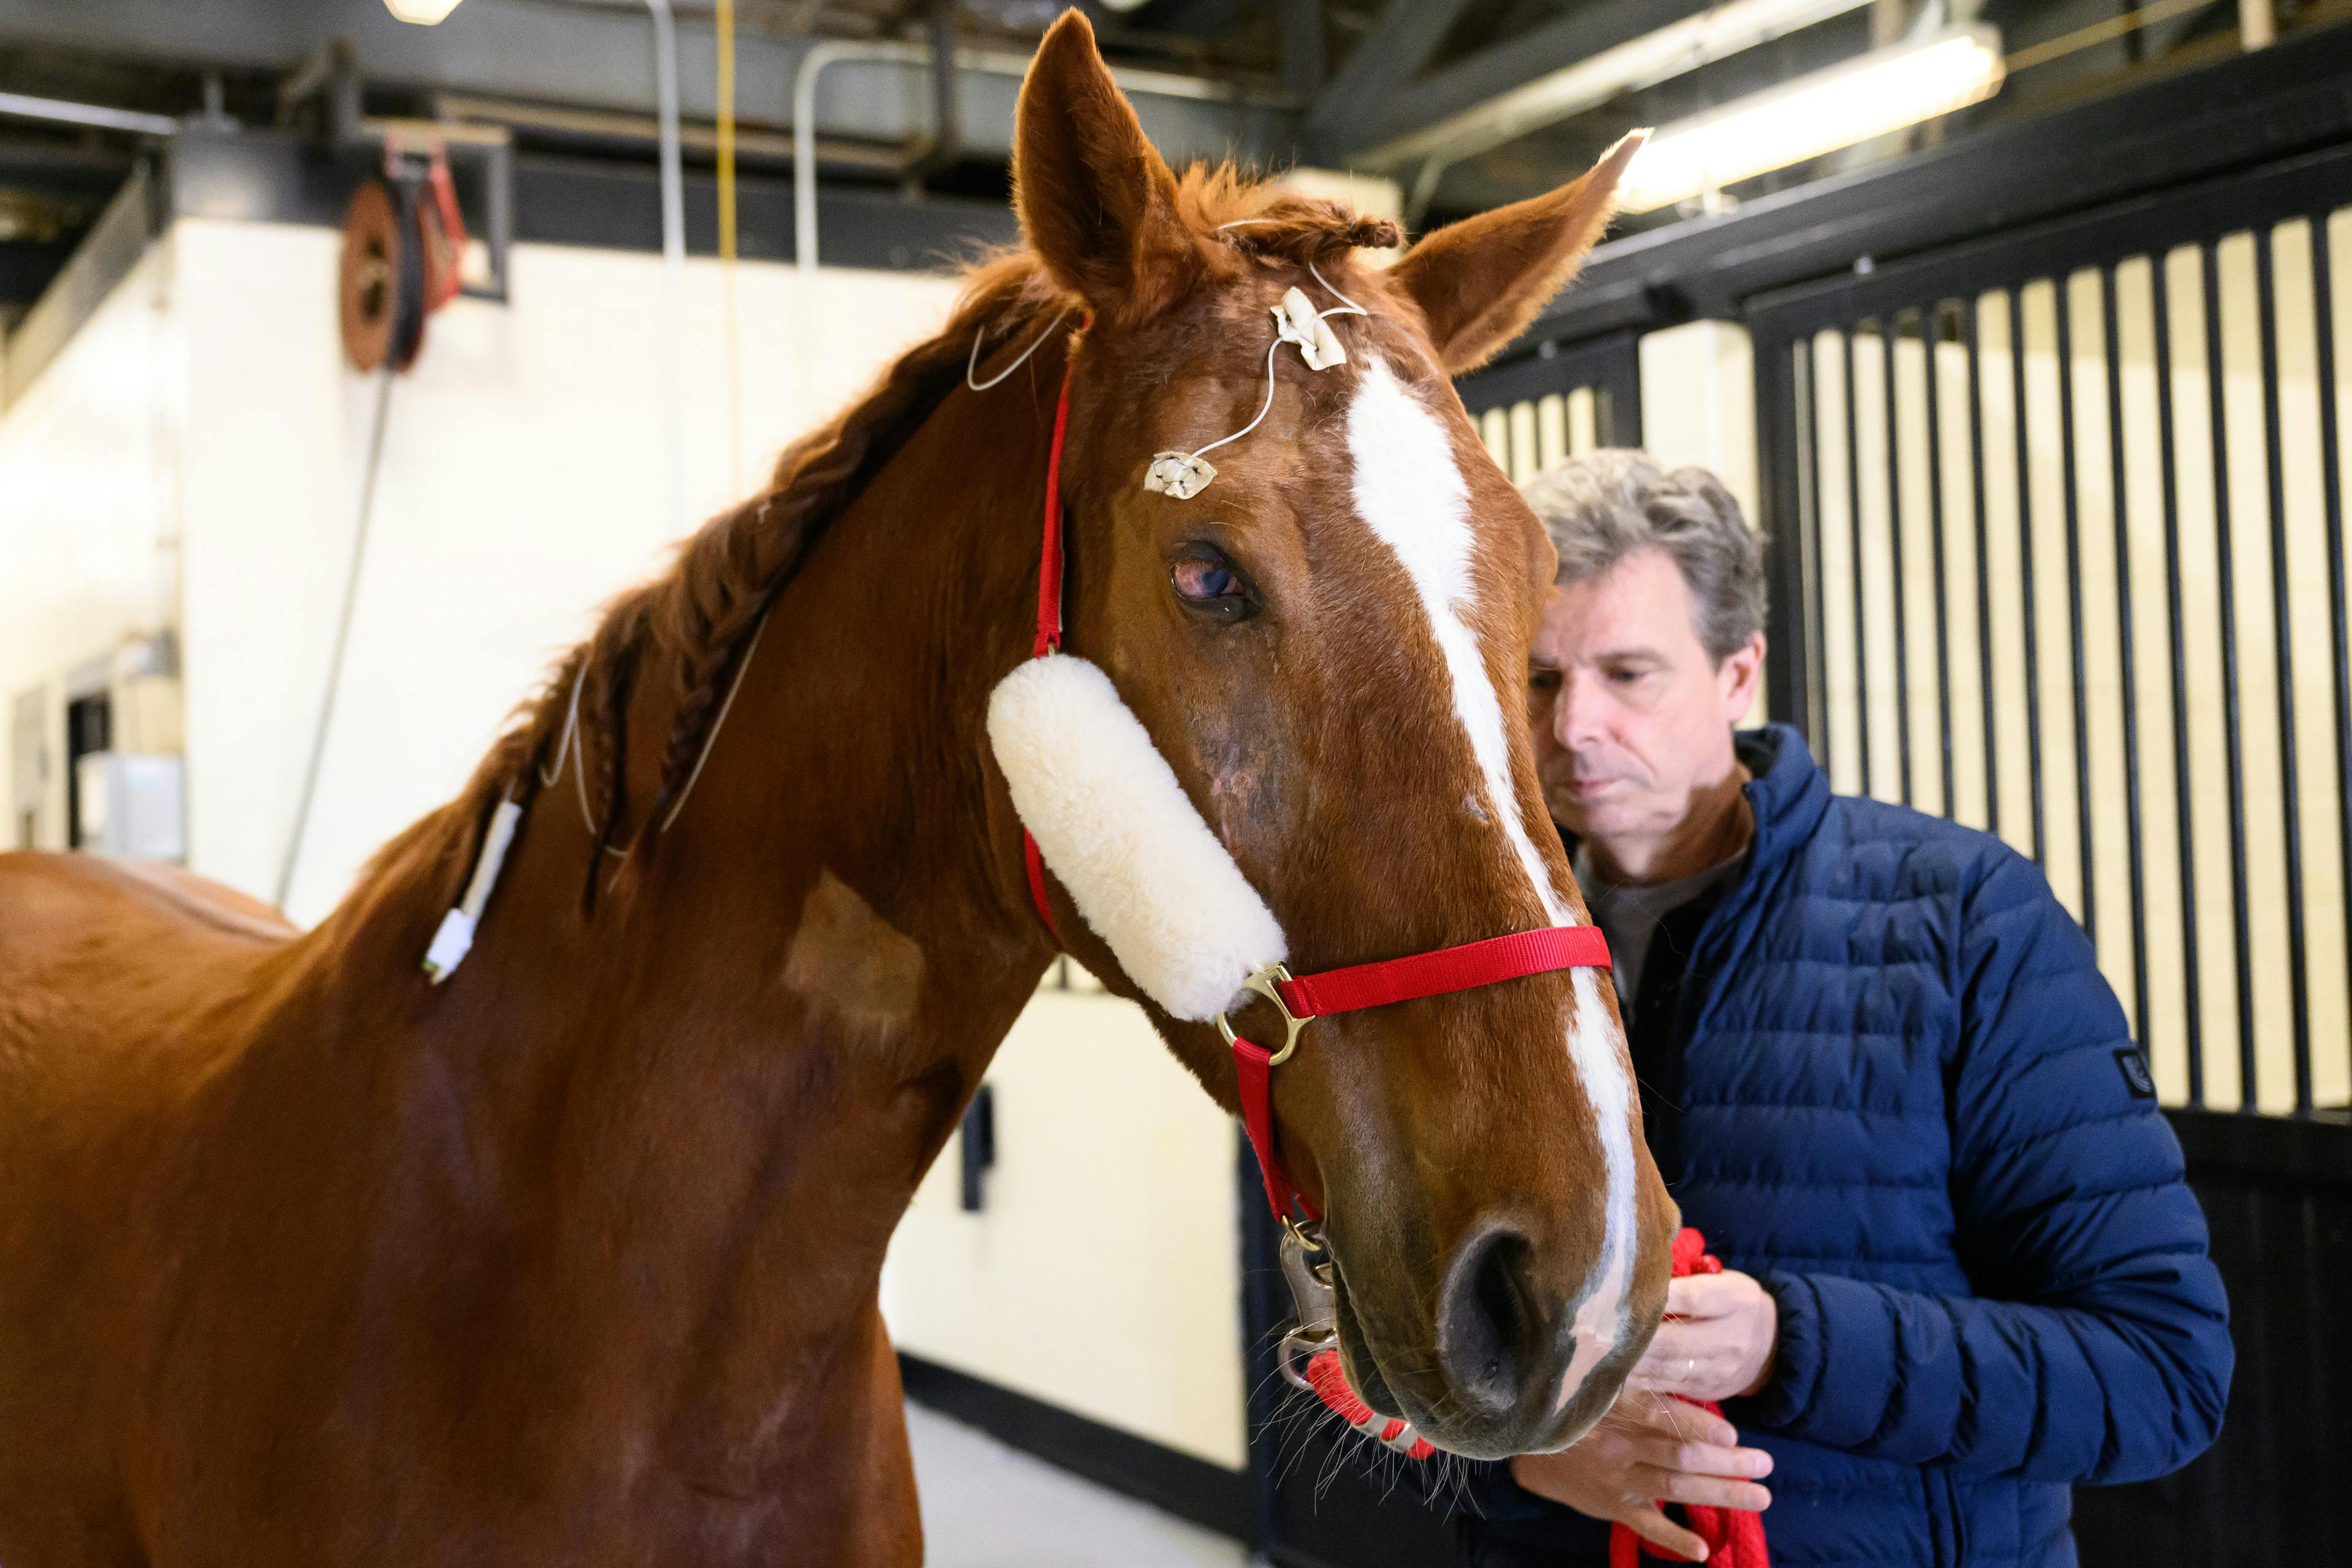 The largest equine corneal transplant ever reported